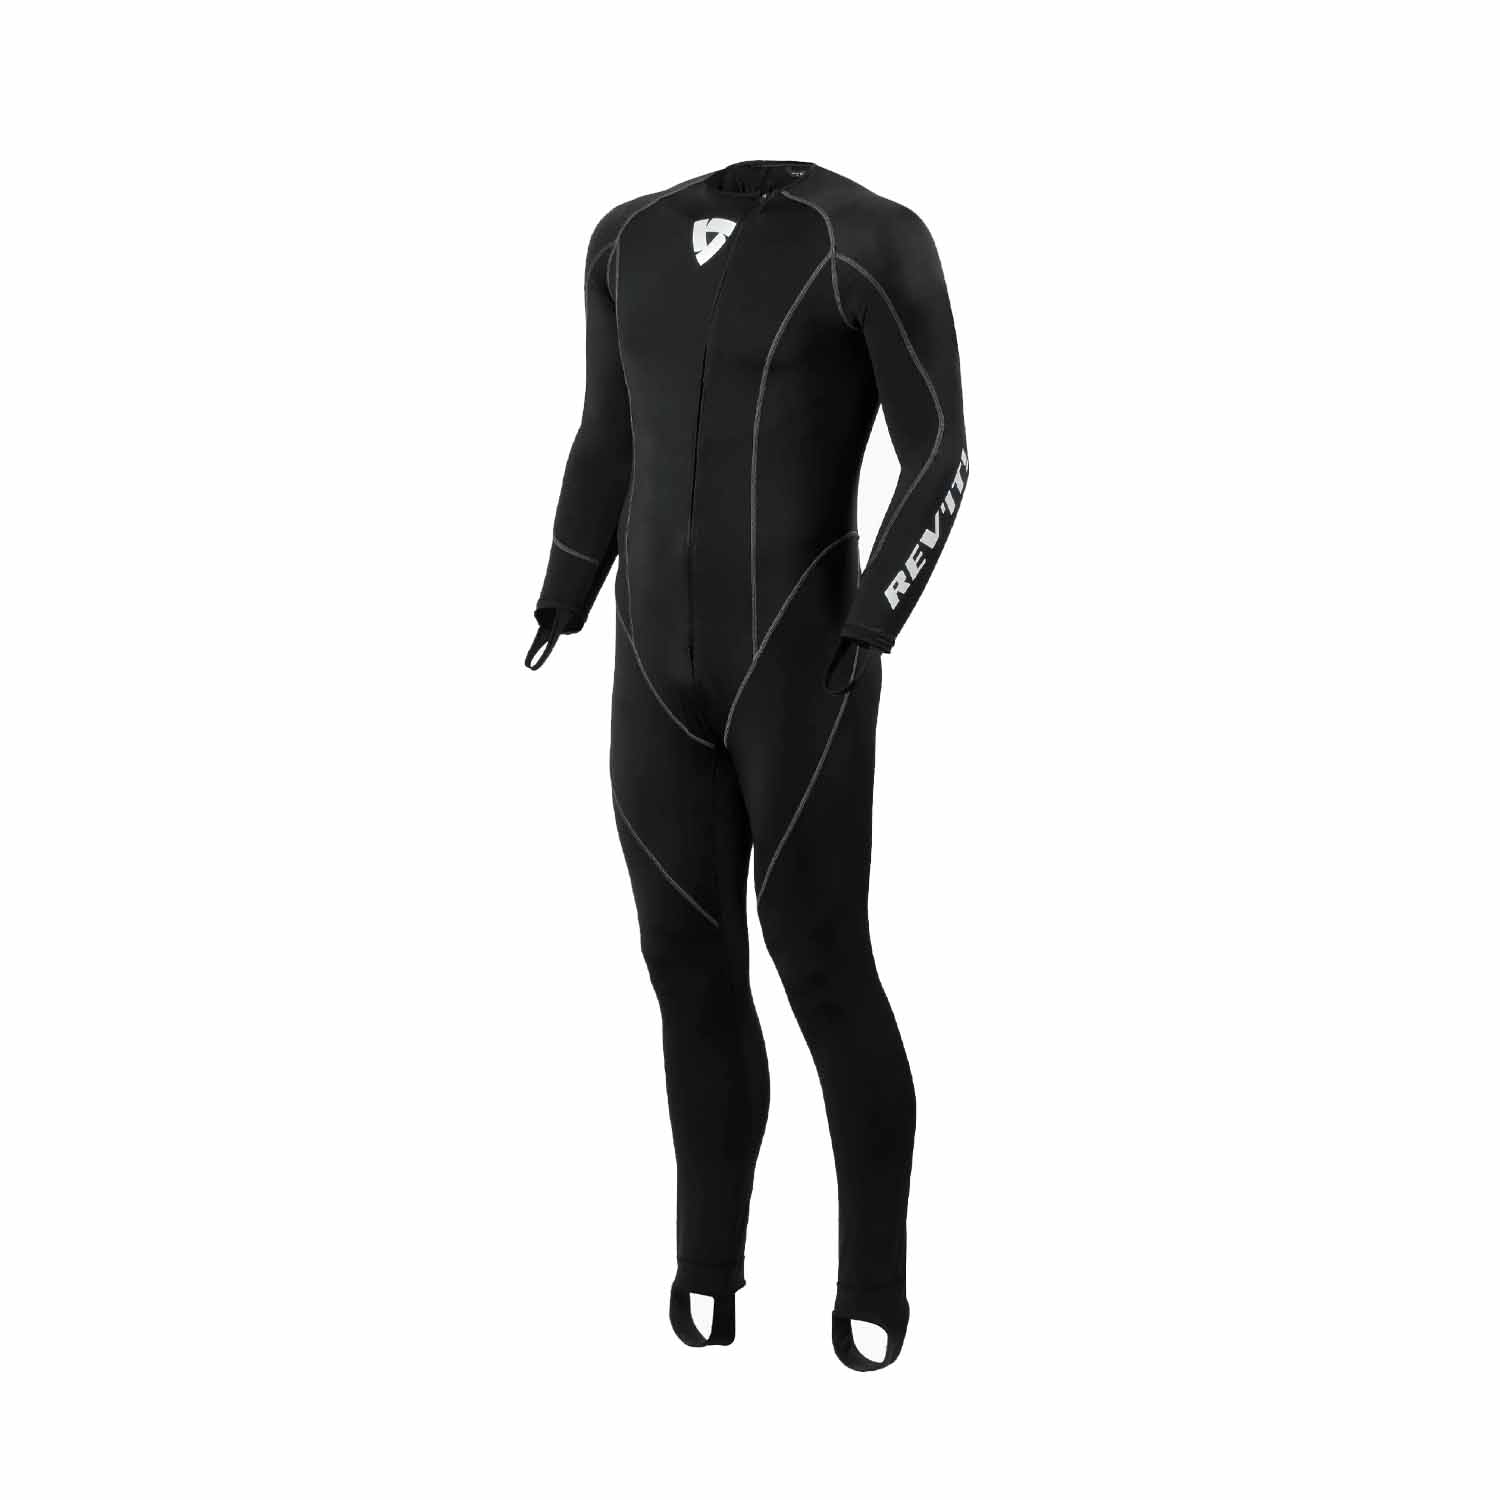 Image of REV'IT! Excellerator 2 Undersuit Black Size 2XL ID 8700001387873